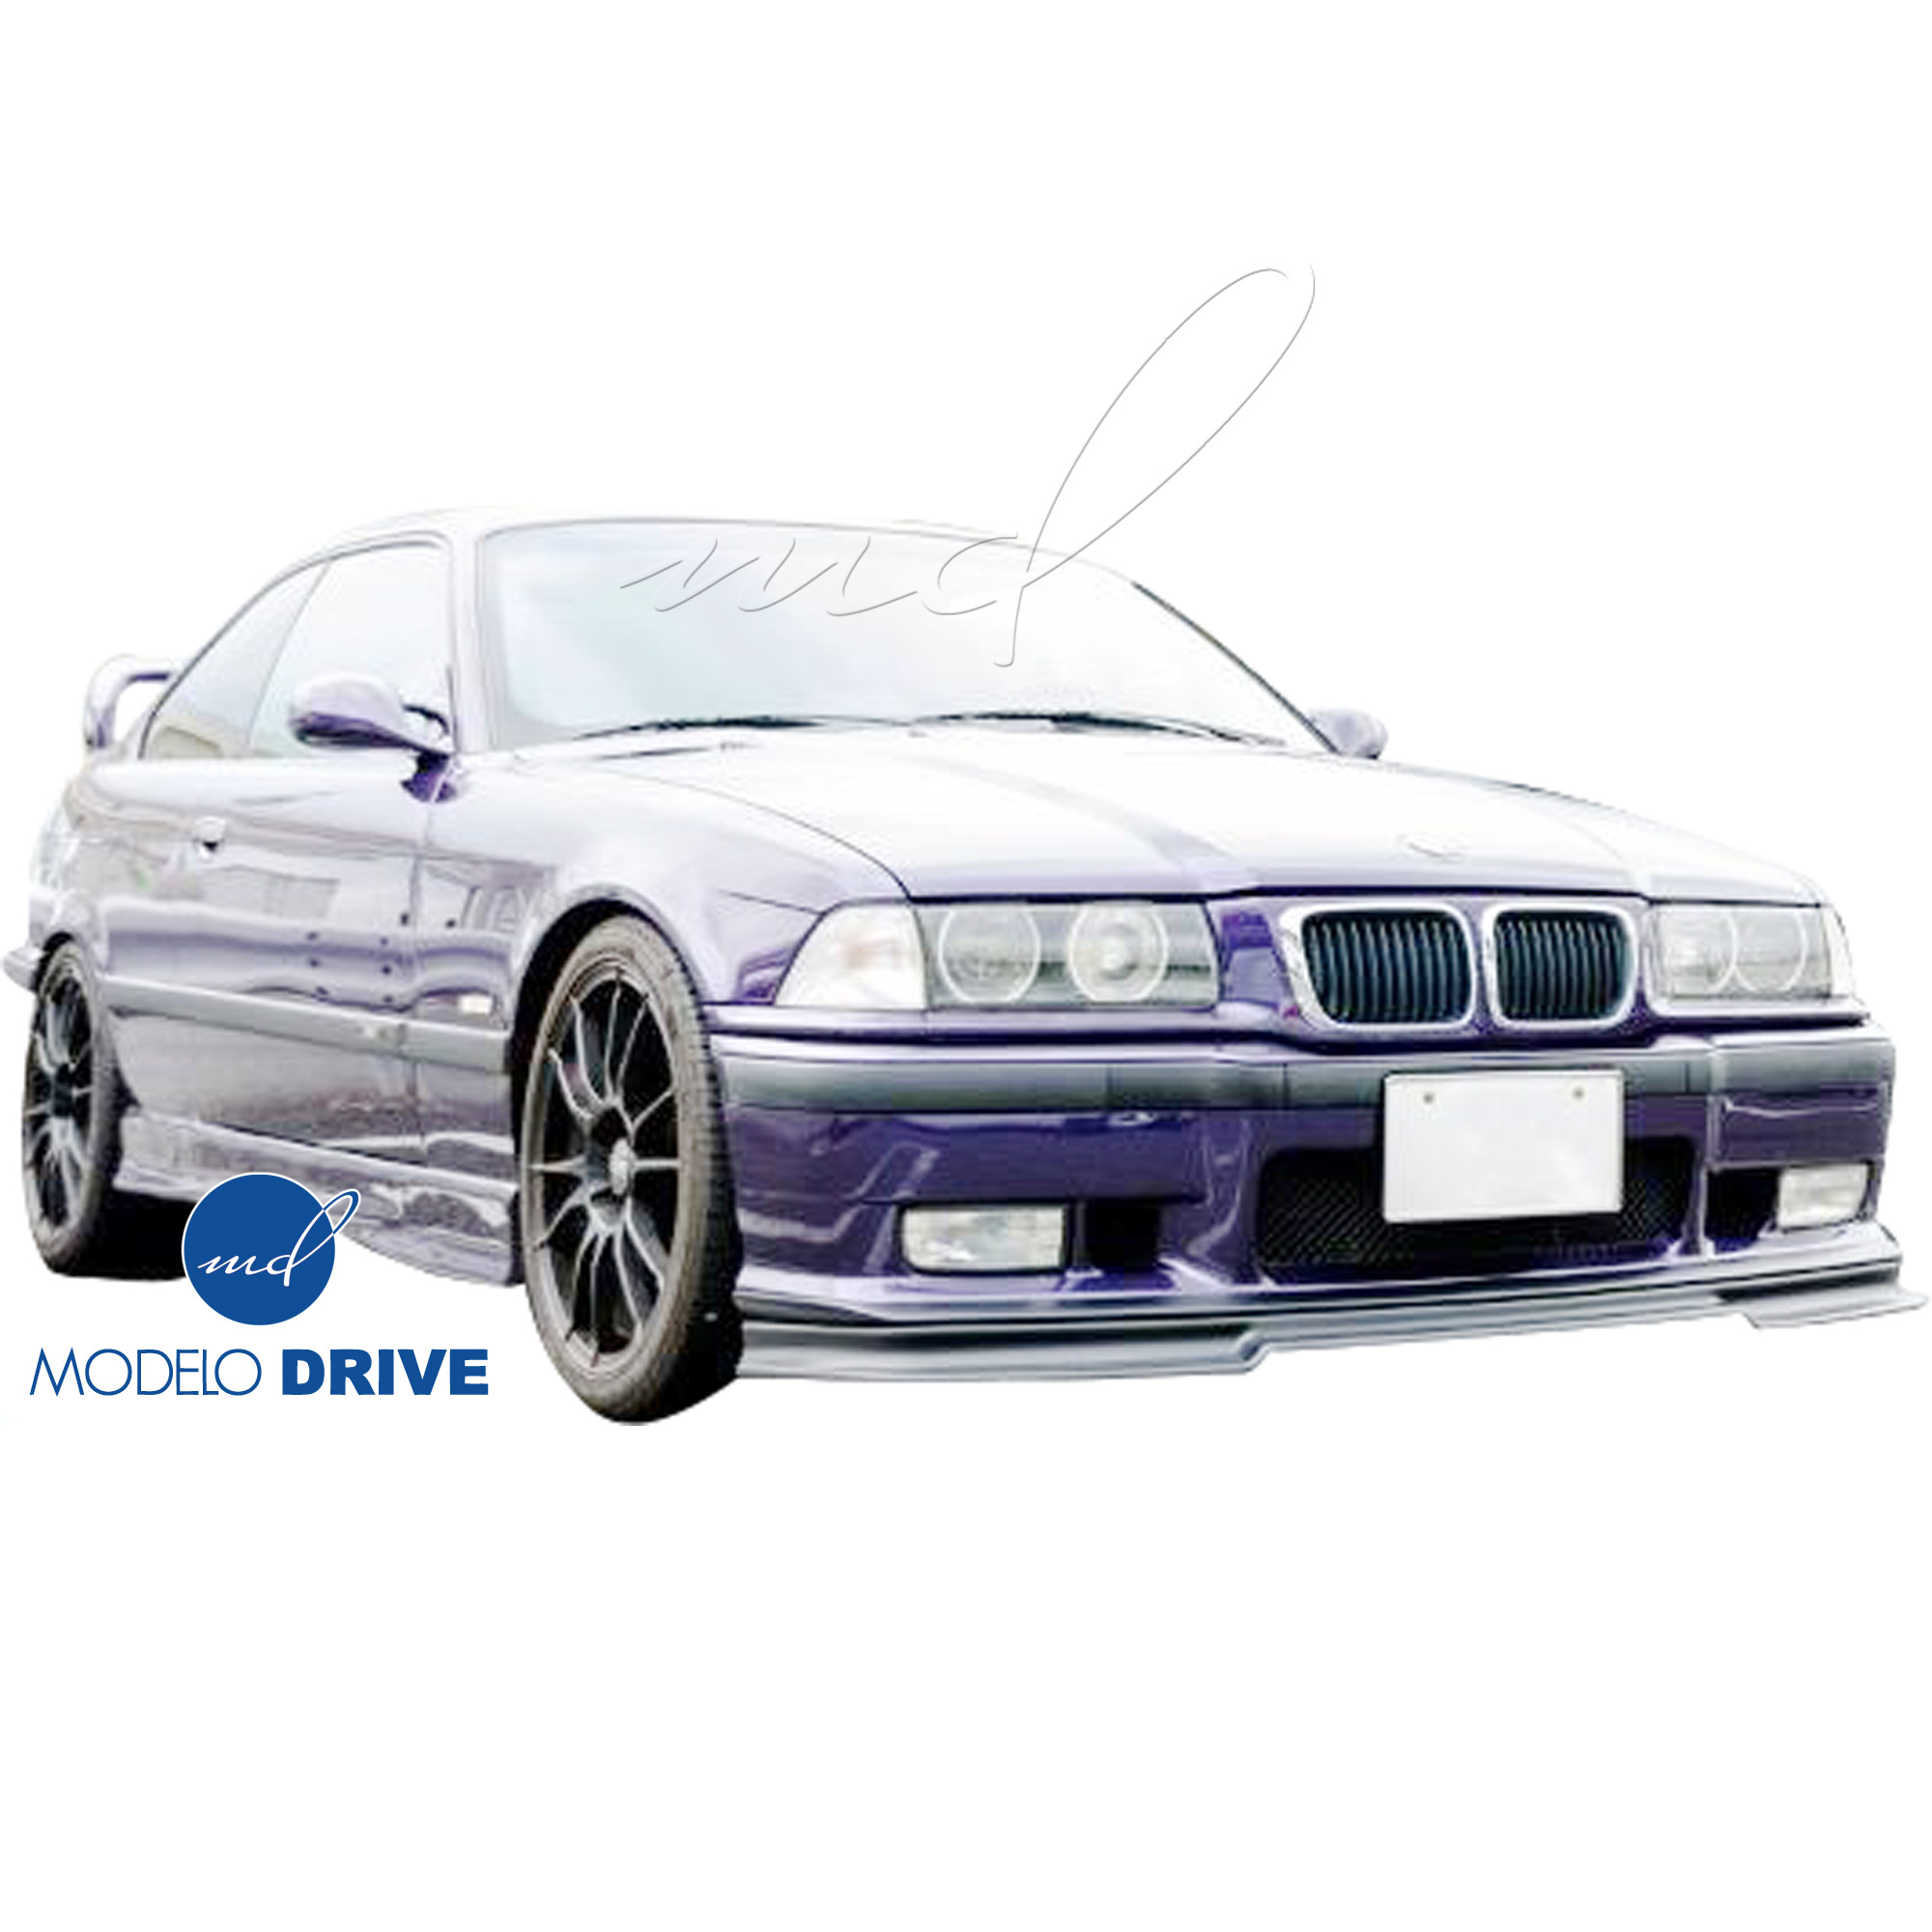 ModeloDrive FRP RIEG GT CUP Front Valance Add-on > BMW M3 E36 1992-1998 > 2dr - Image 7